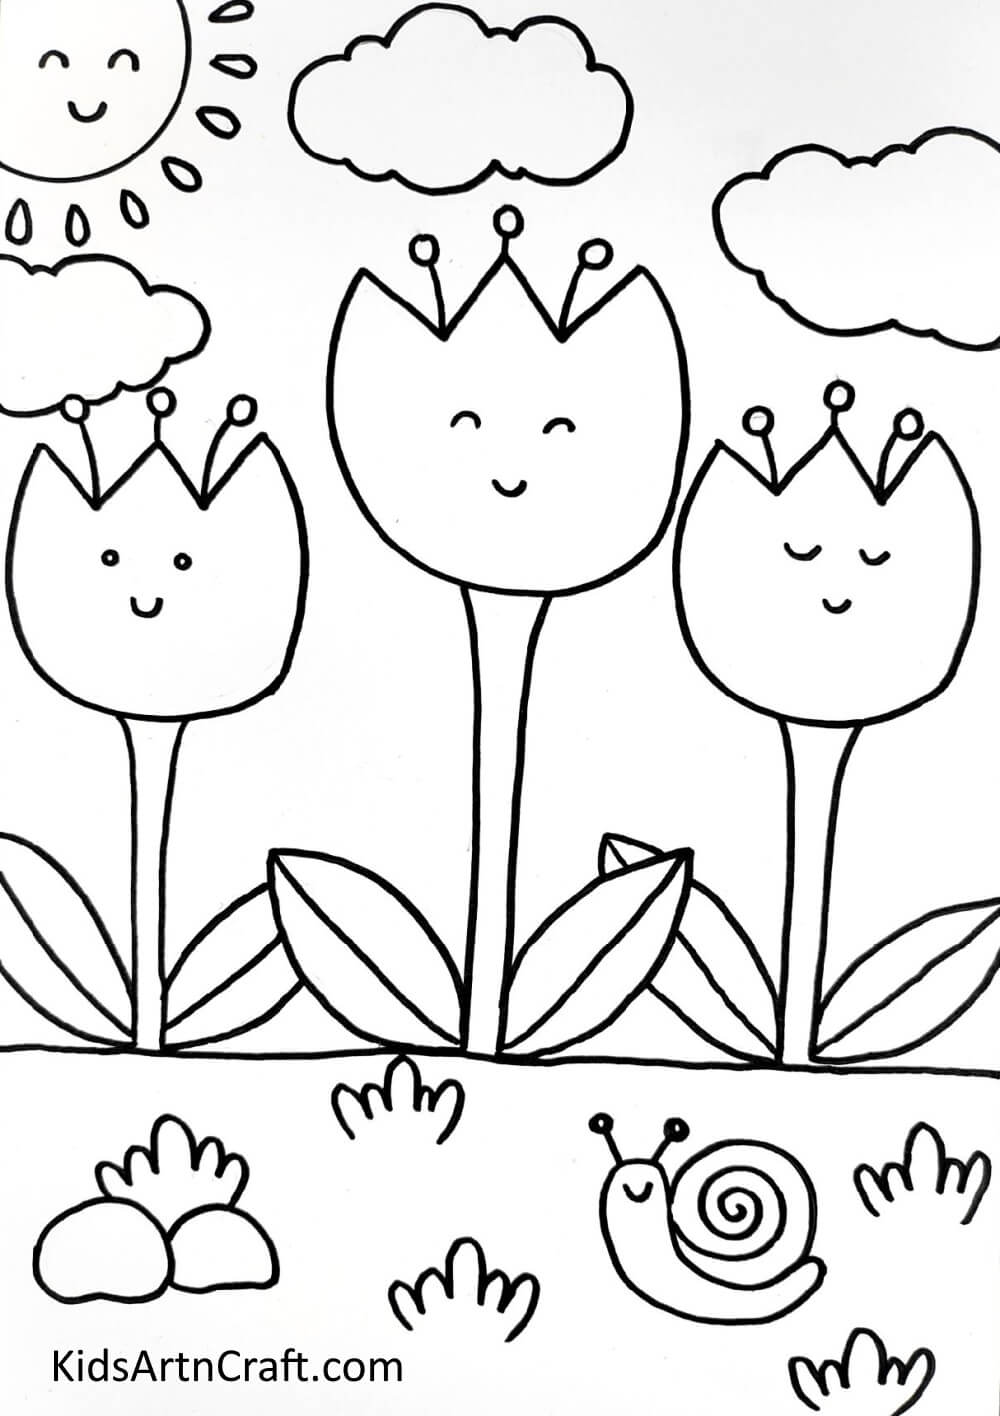 Drawing Sky - It's easy for kids to make tulips at home.